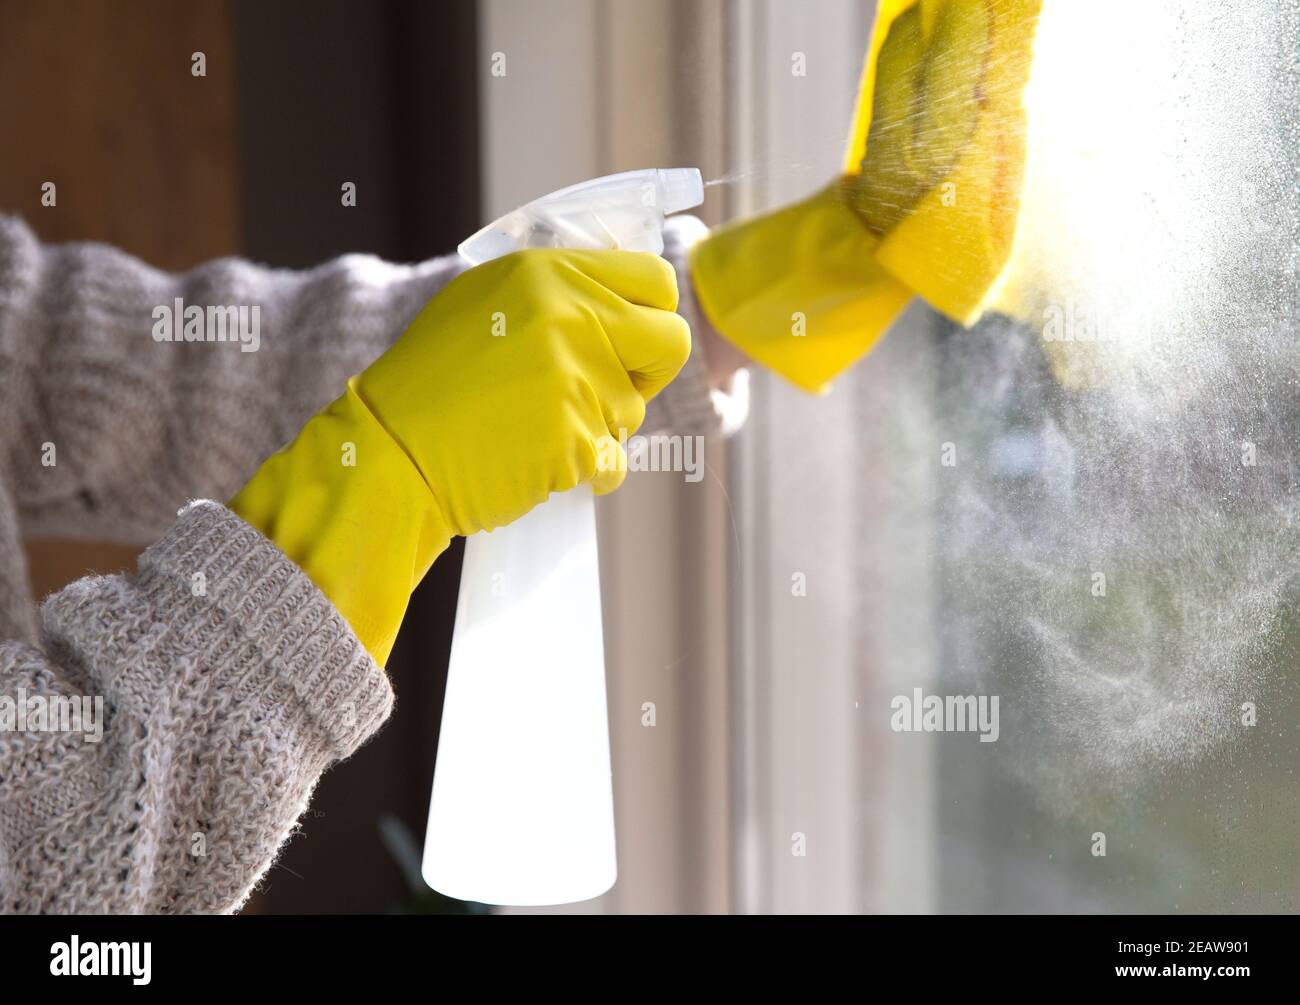 https://c8.alamy.com/comp/2EAW901/cleaning-a-window-with-spray-detergent-yellow-rubber-gloves-and-dish-cloth-on-work-surface-concept-for-hygiene-business-and-health-concept-2EAW901.jpg